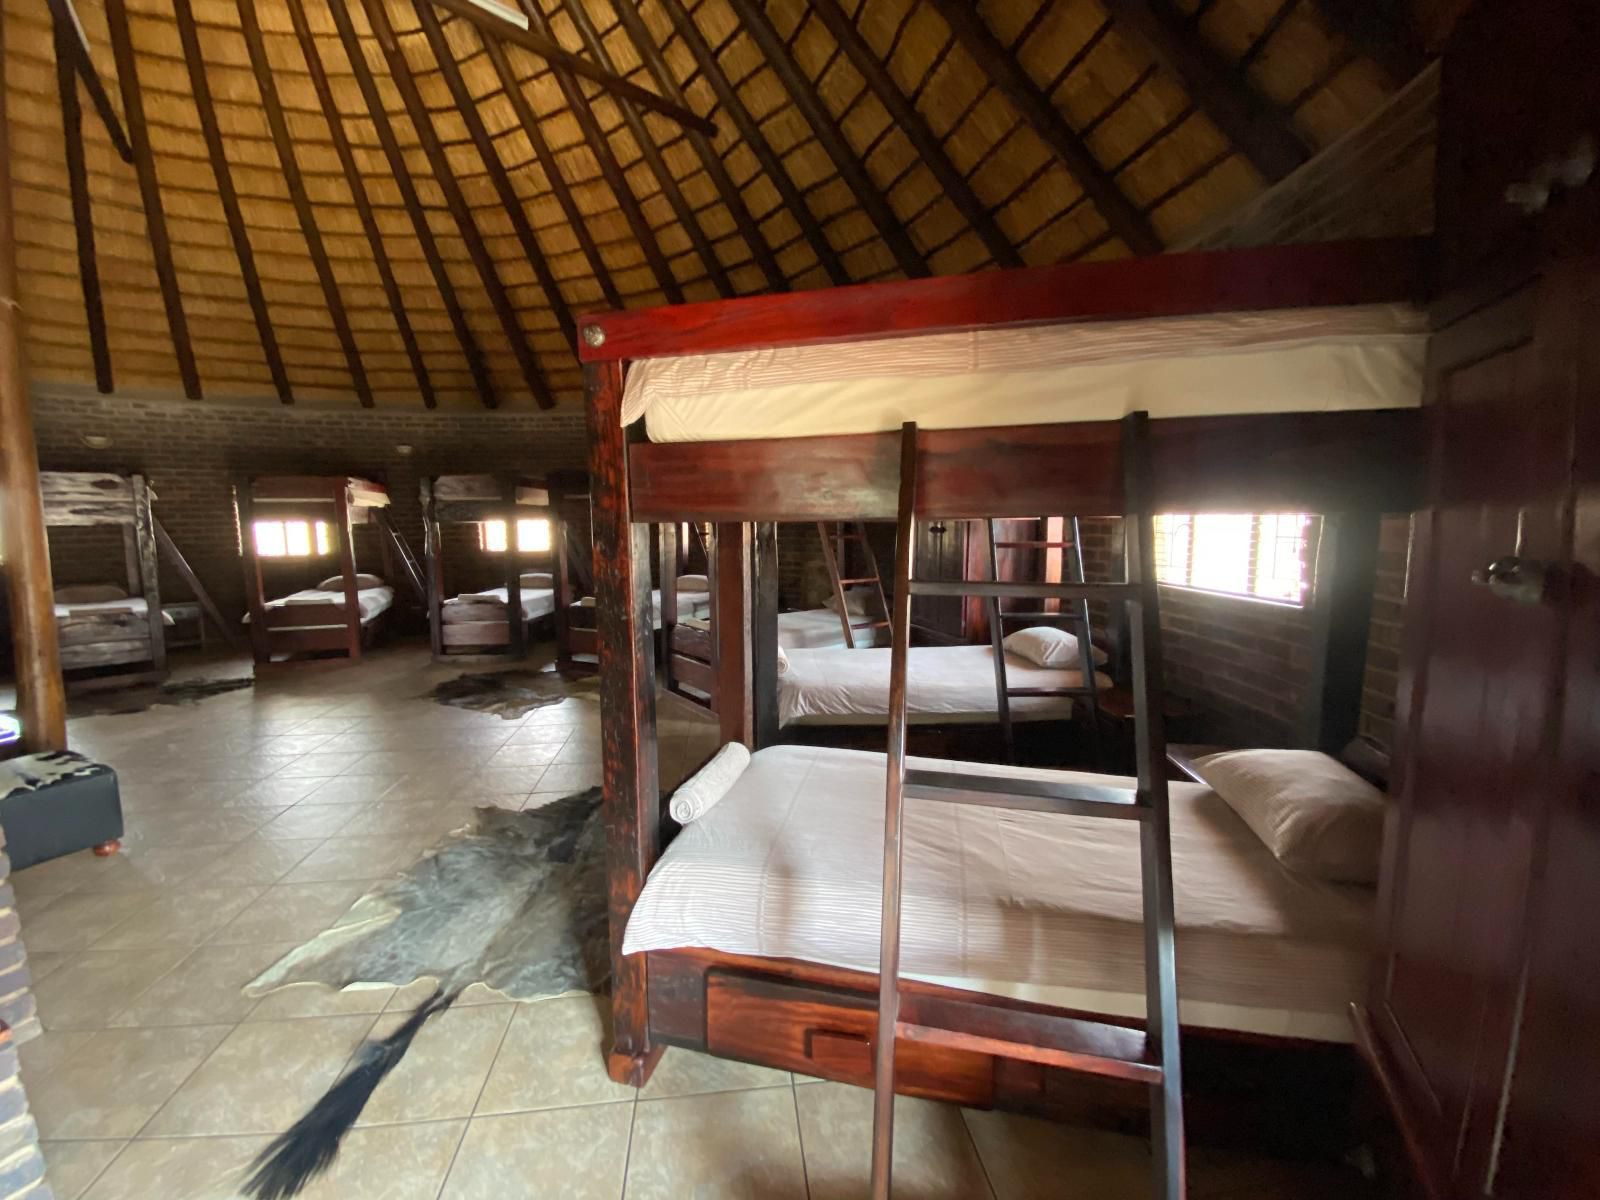 Umlondolozi Game Farm Vaalwater Limpopo Province South Africa Bedroom